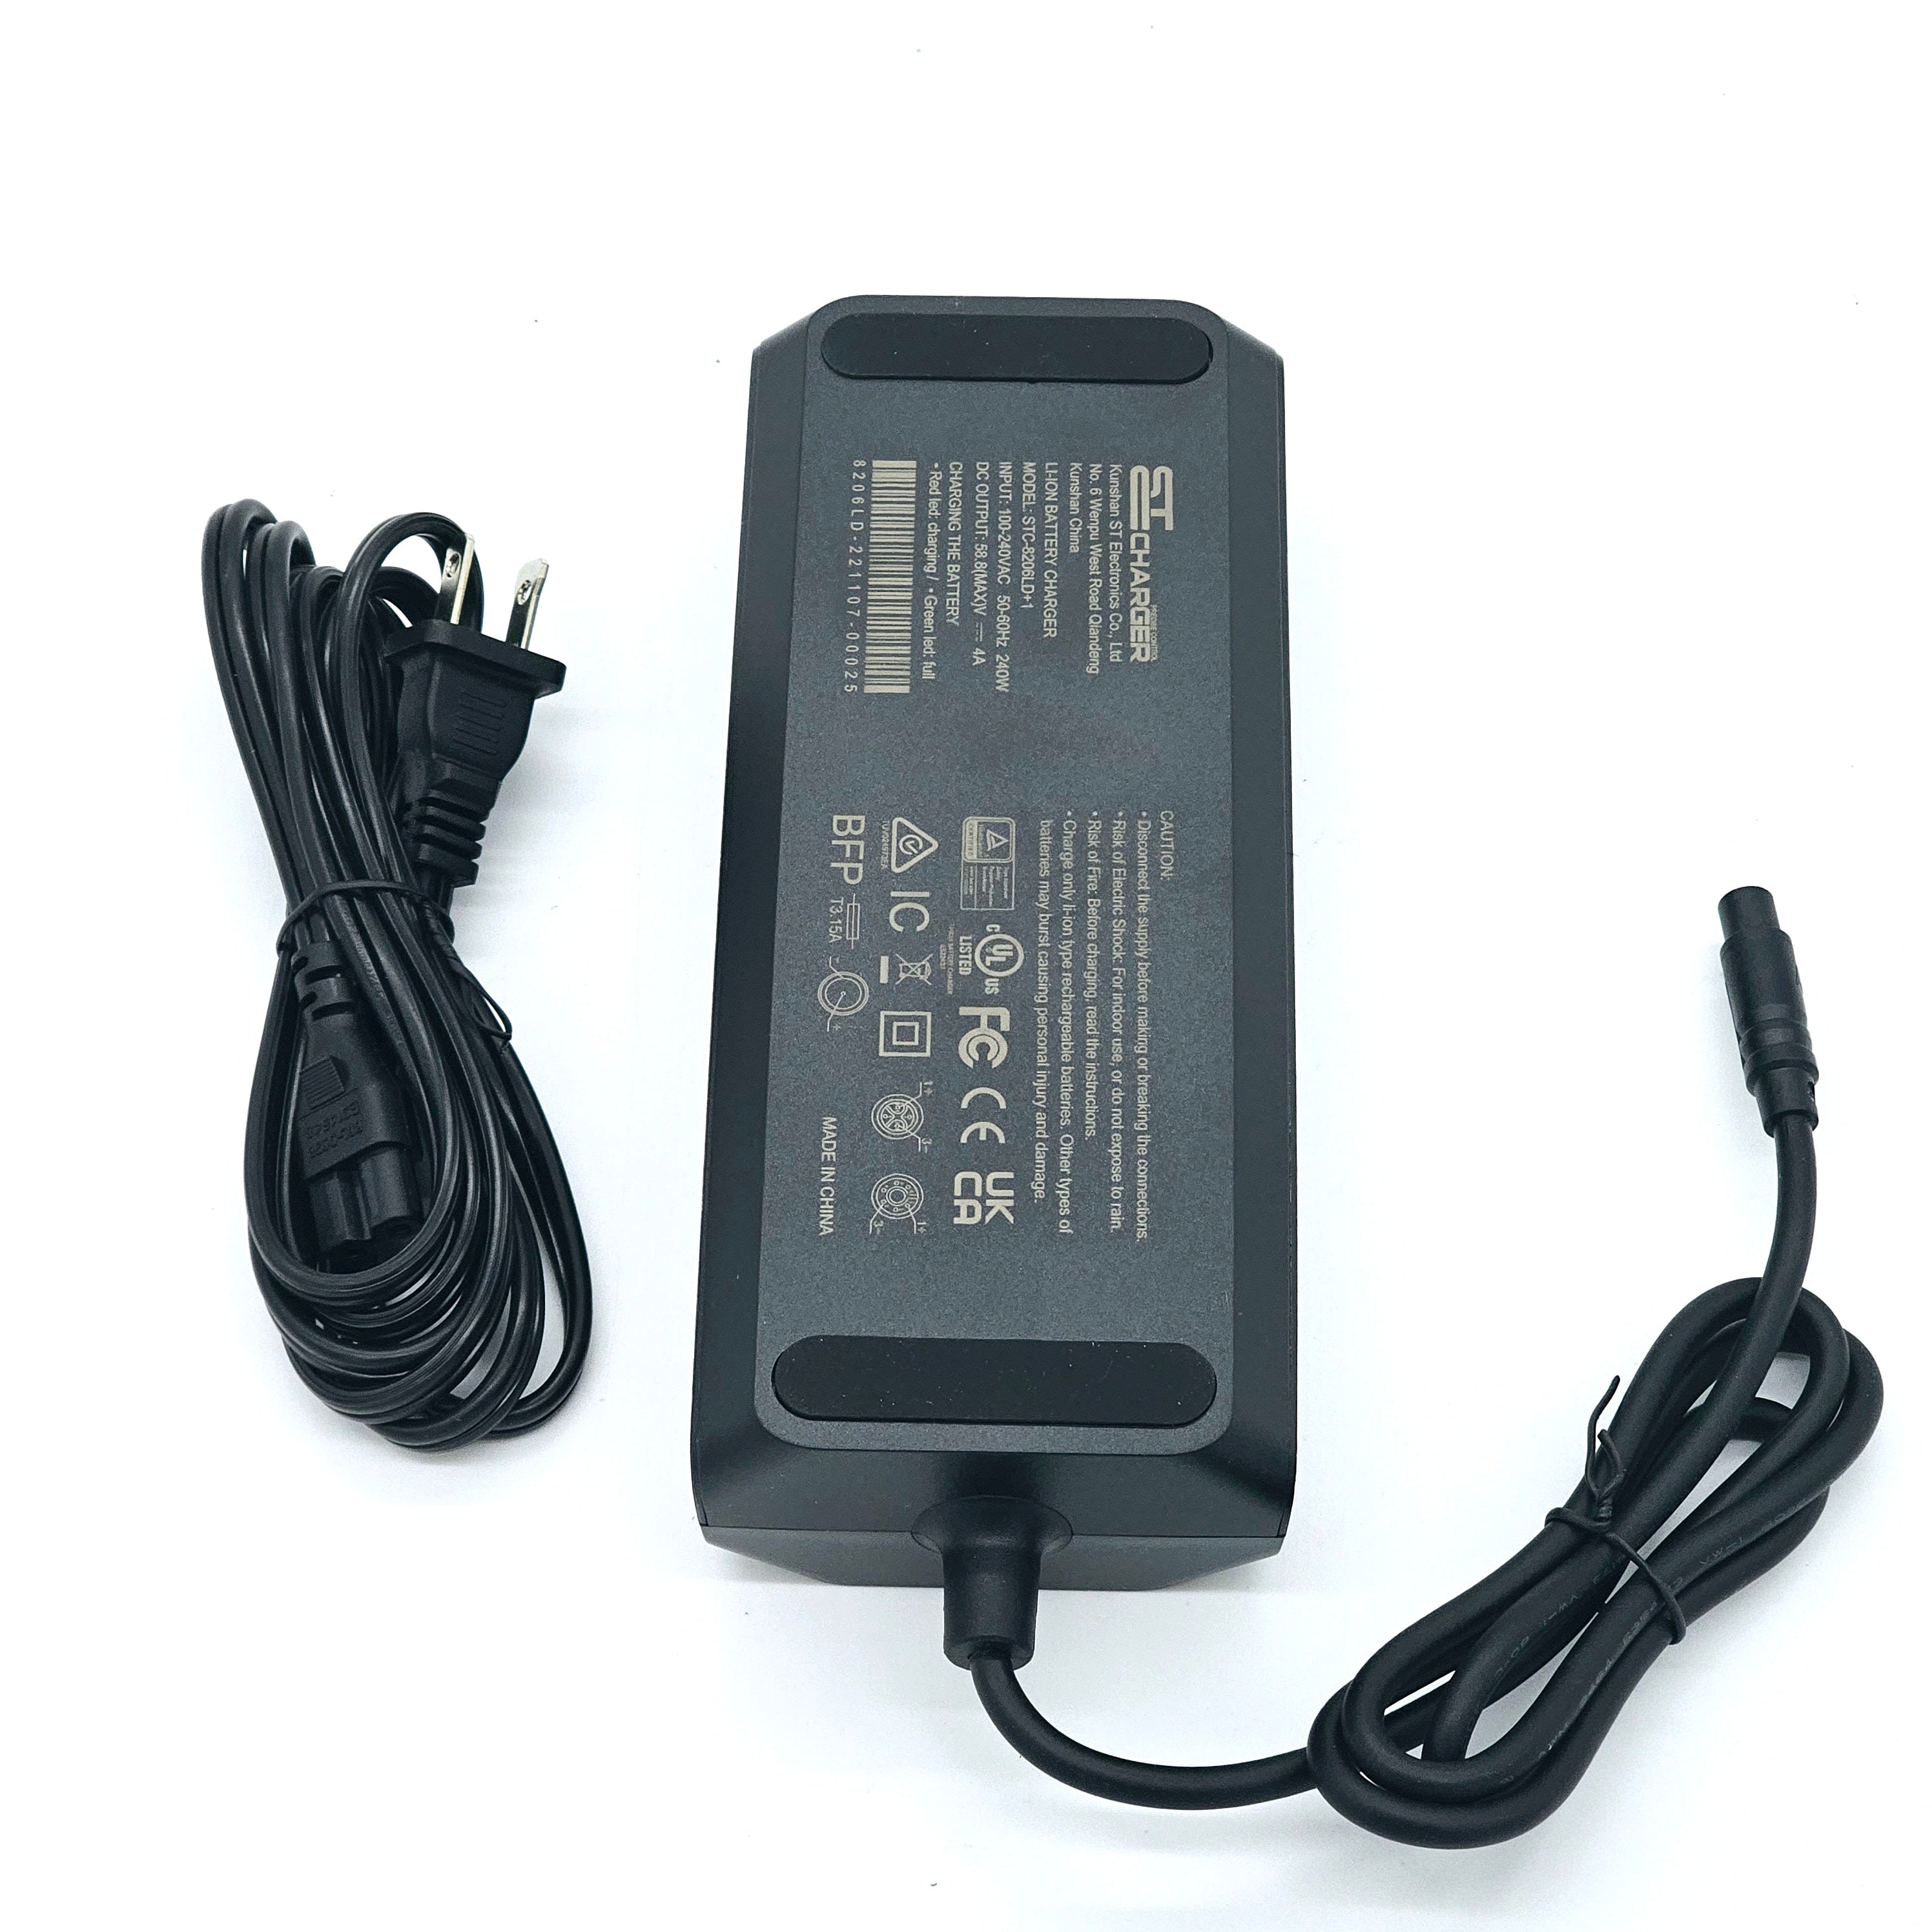 Charger 4A 52V (58.8)